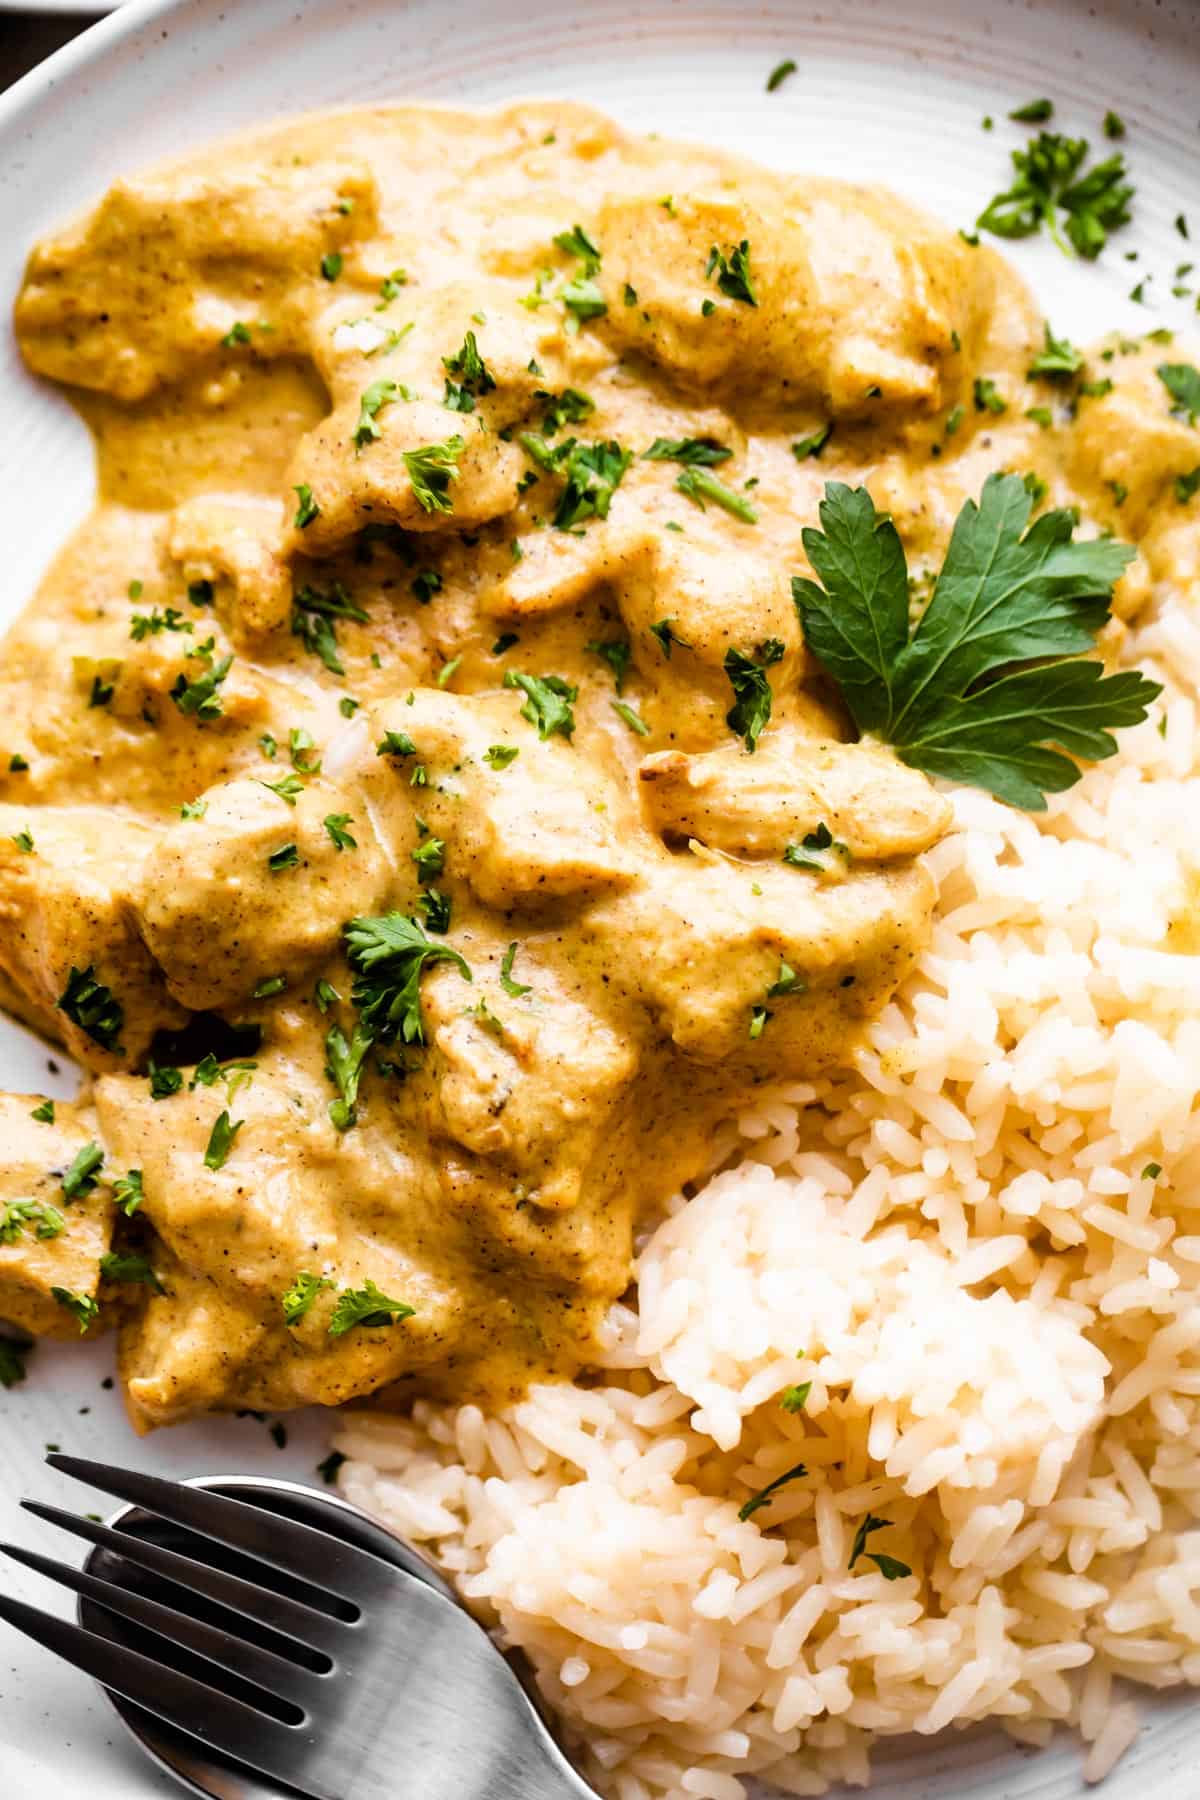 chicken korma served alongside some rice and topped with chopped cilantro.